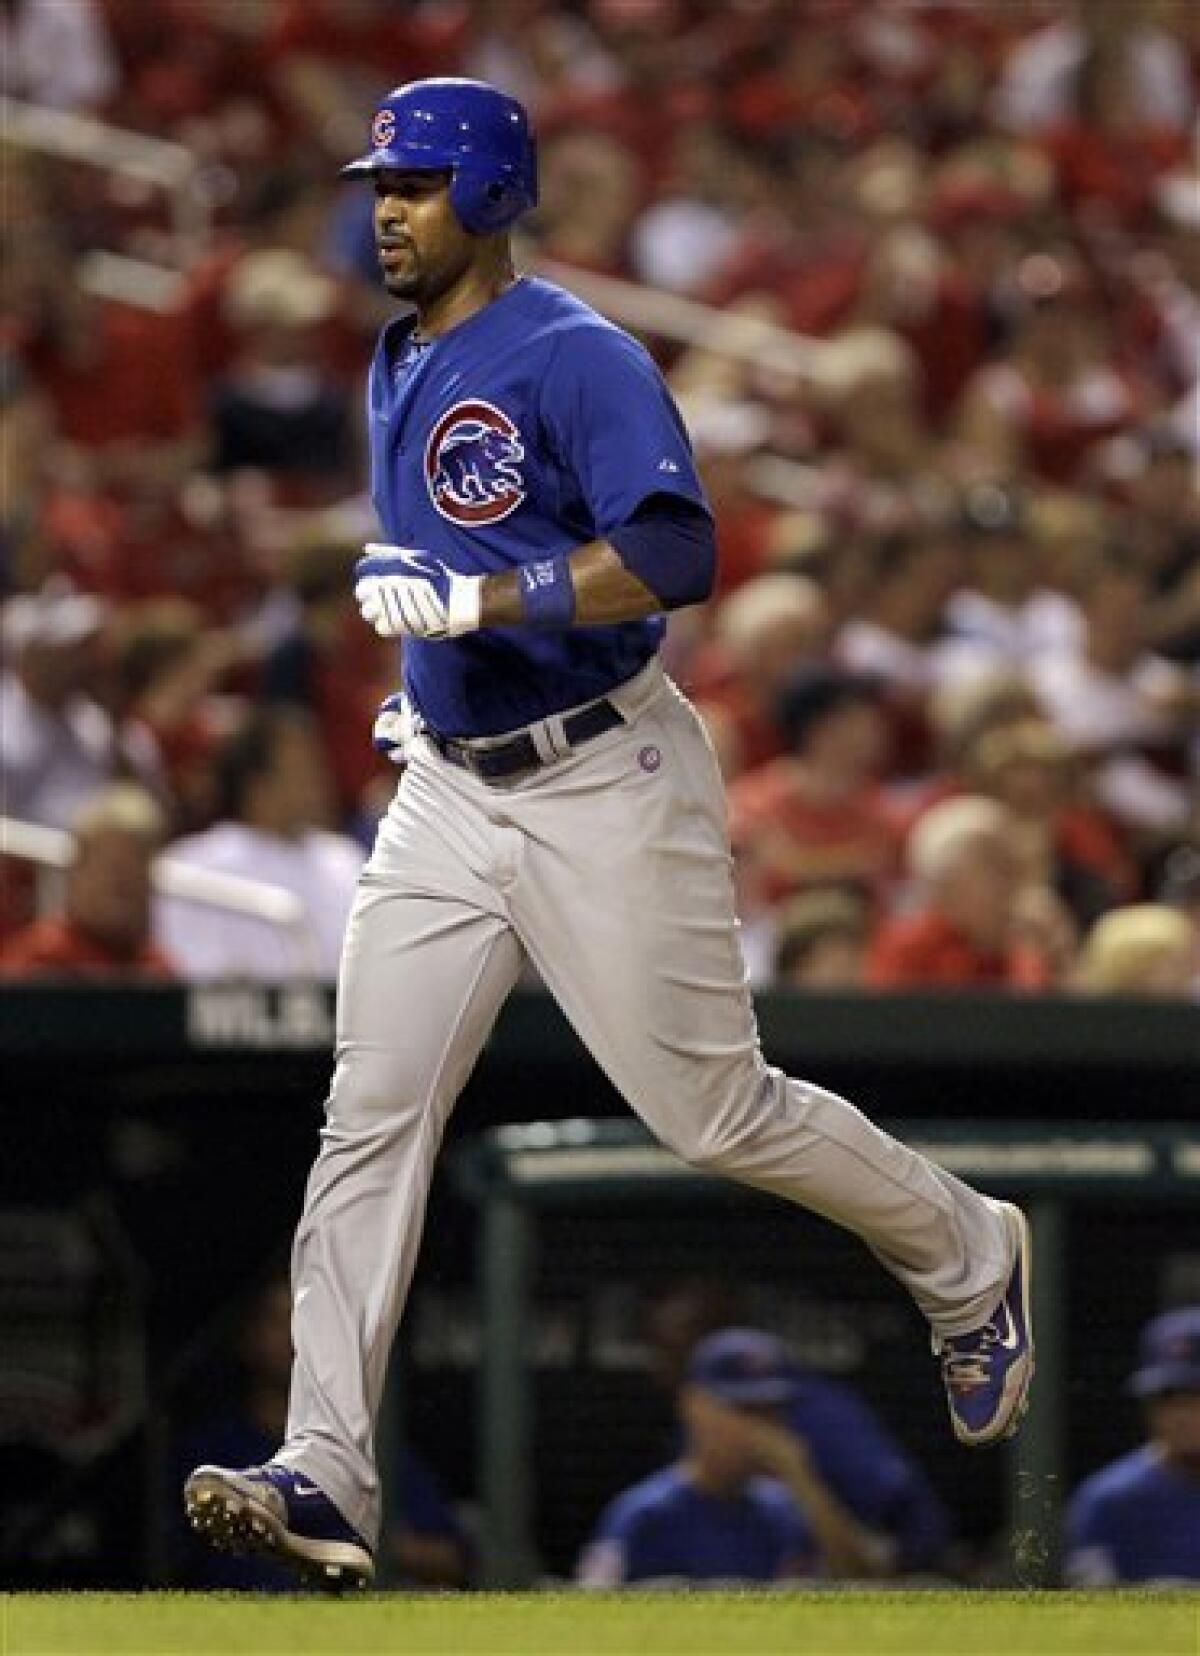 Braves acquire 1B Derrek Lee from Cubs - The San Diego Union-Tribune